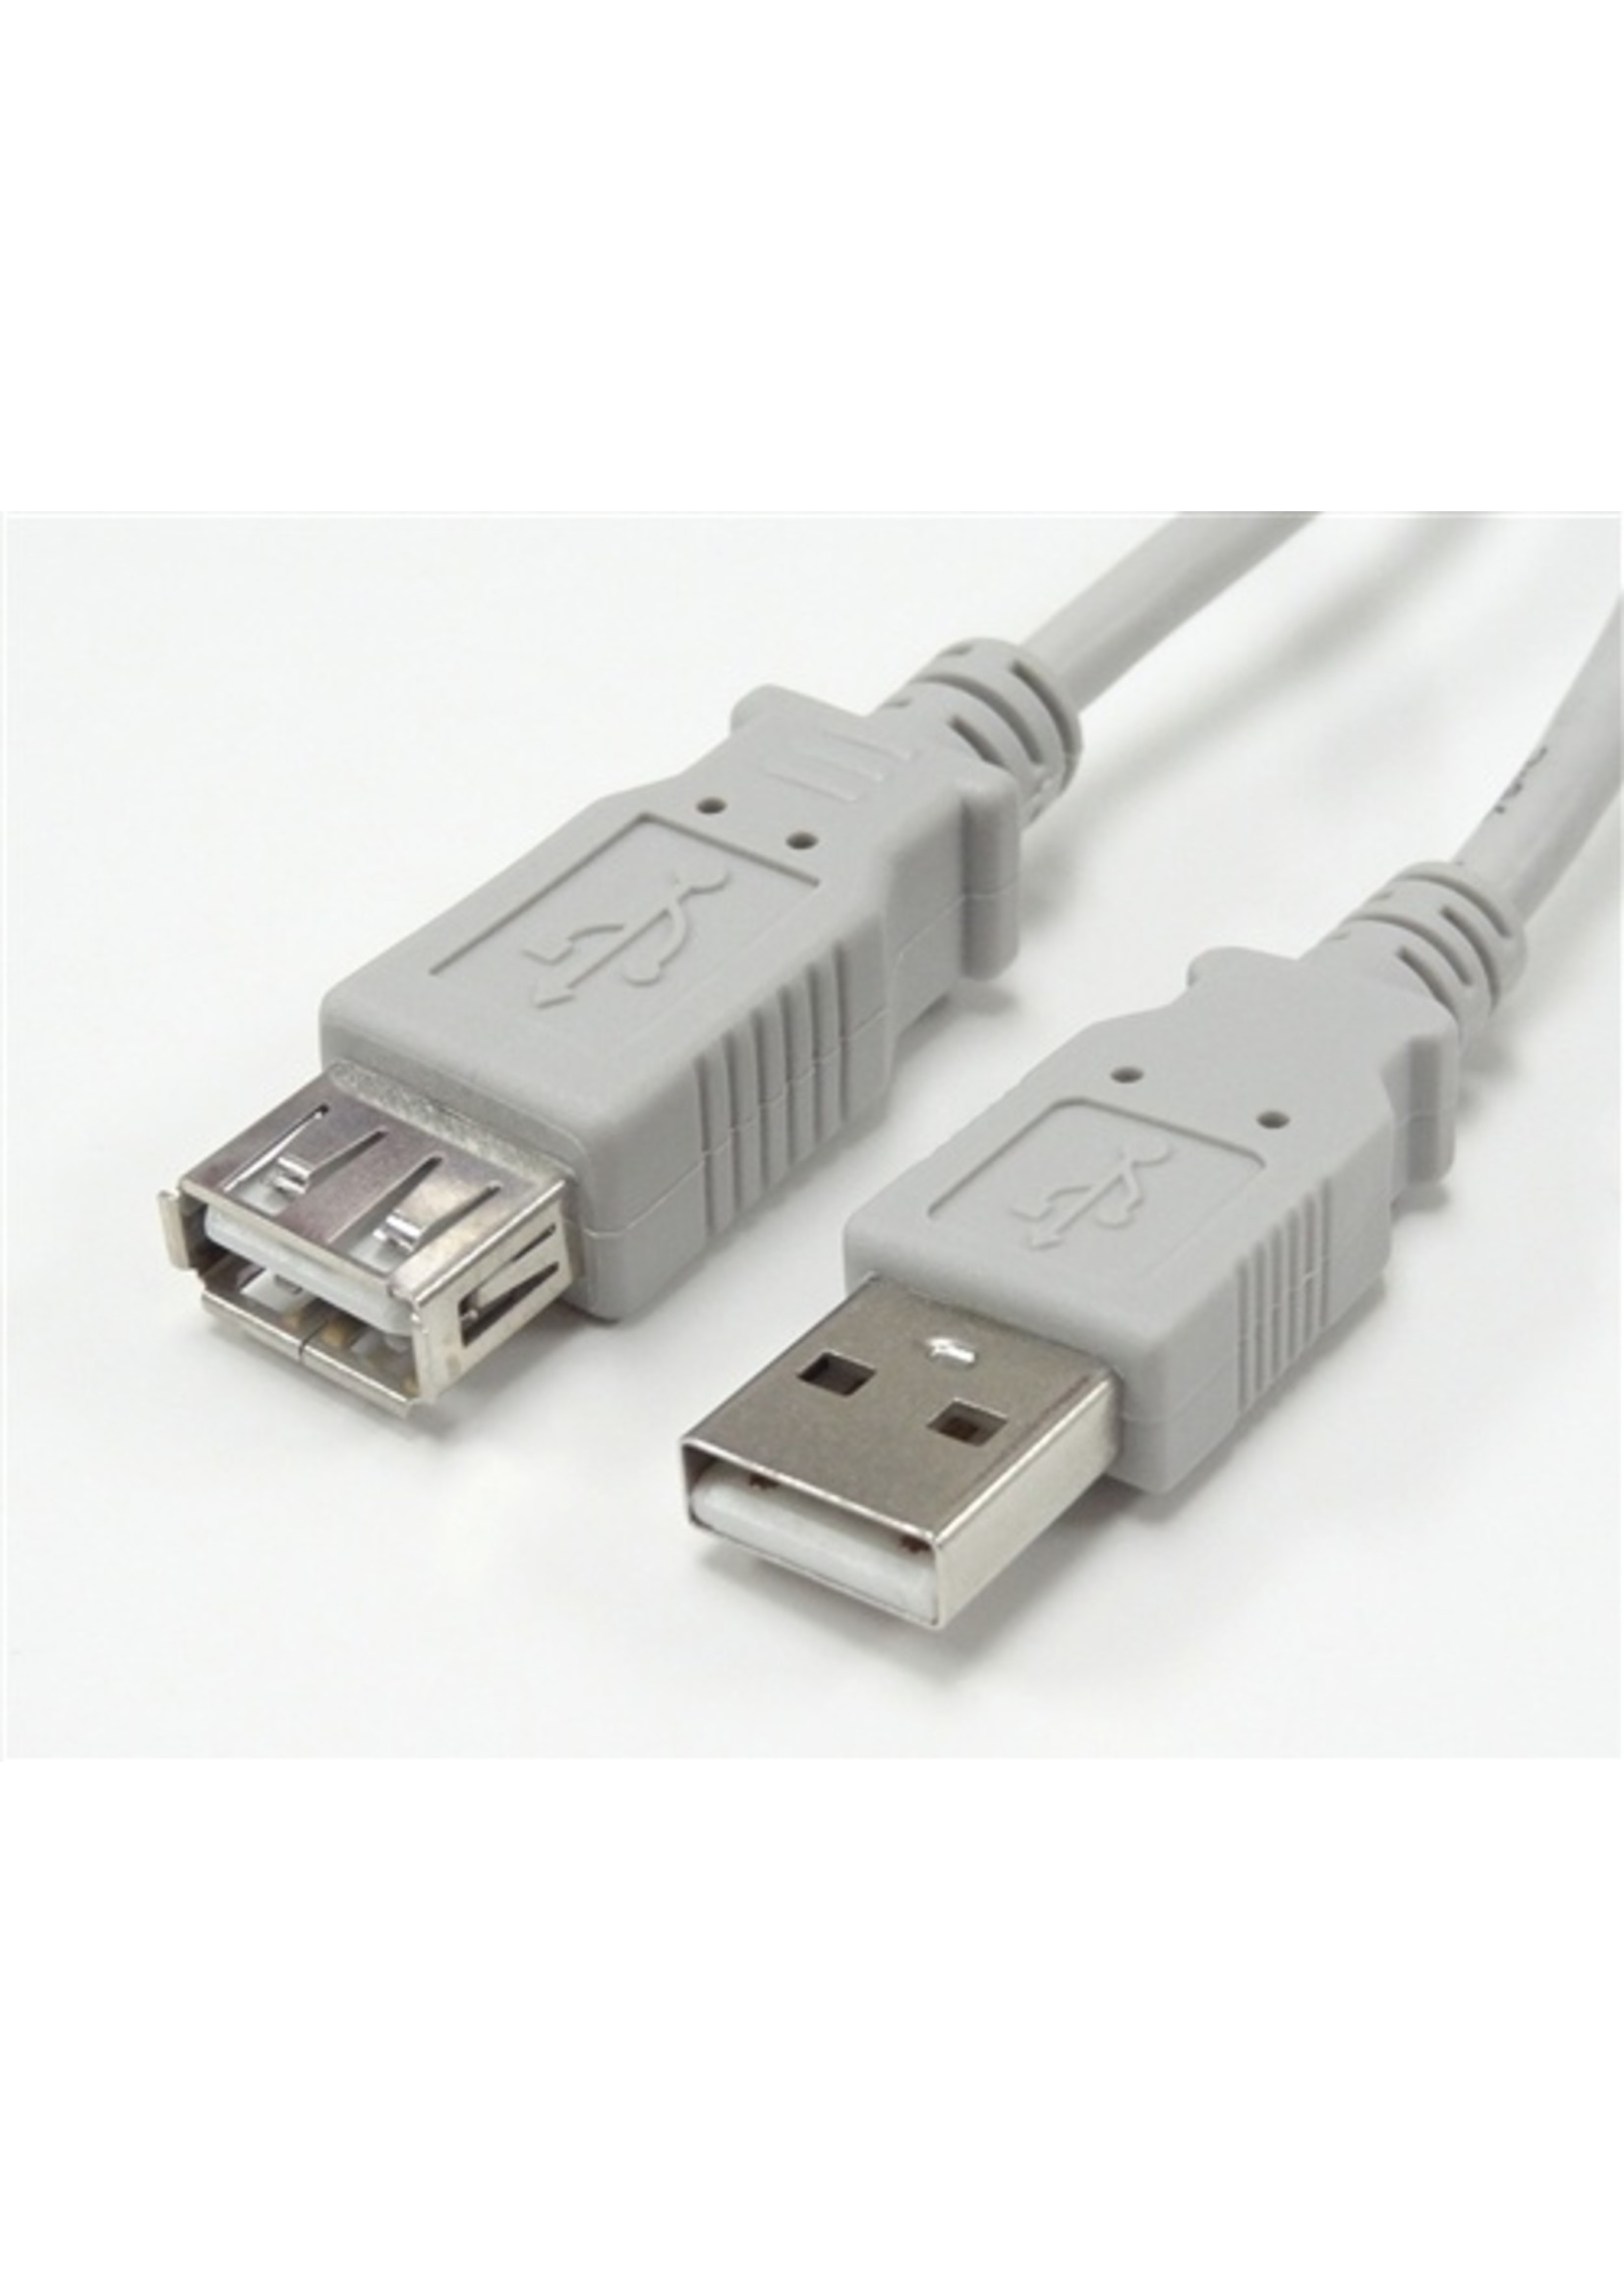 3' USB 2.0 M - A F Ext Cable